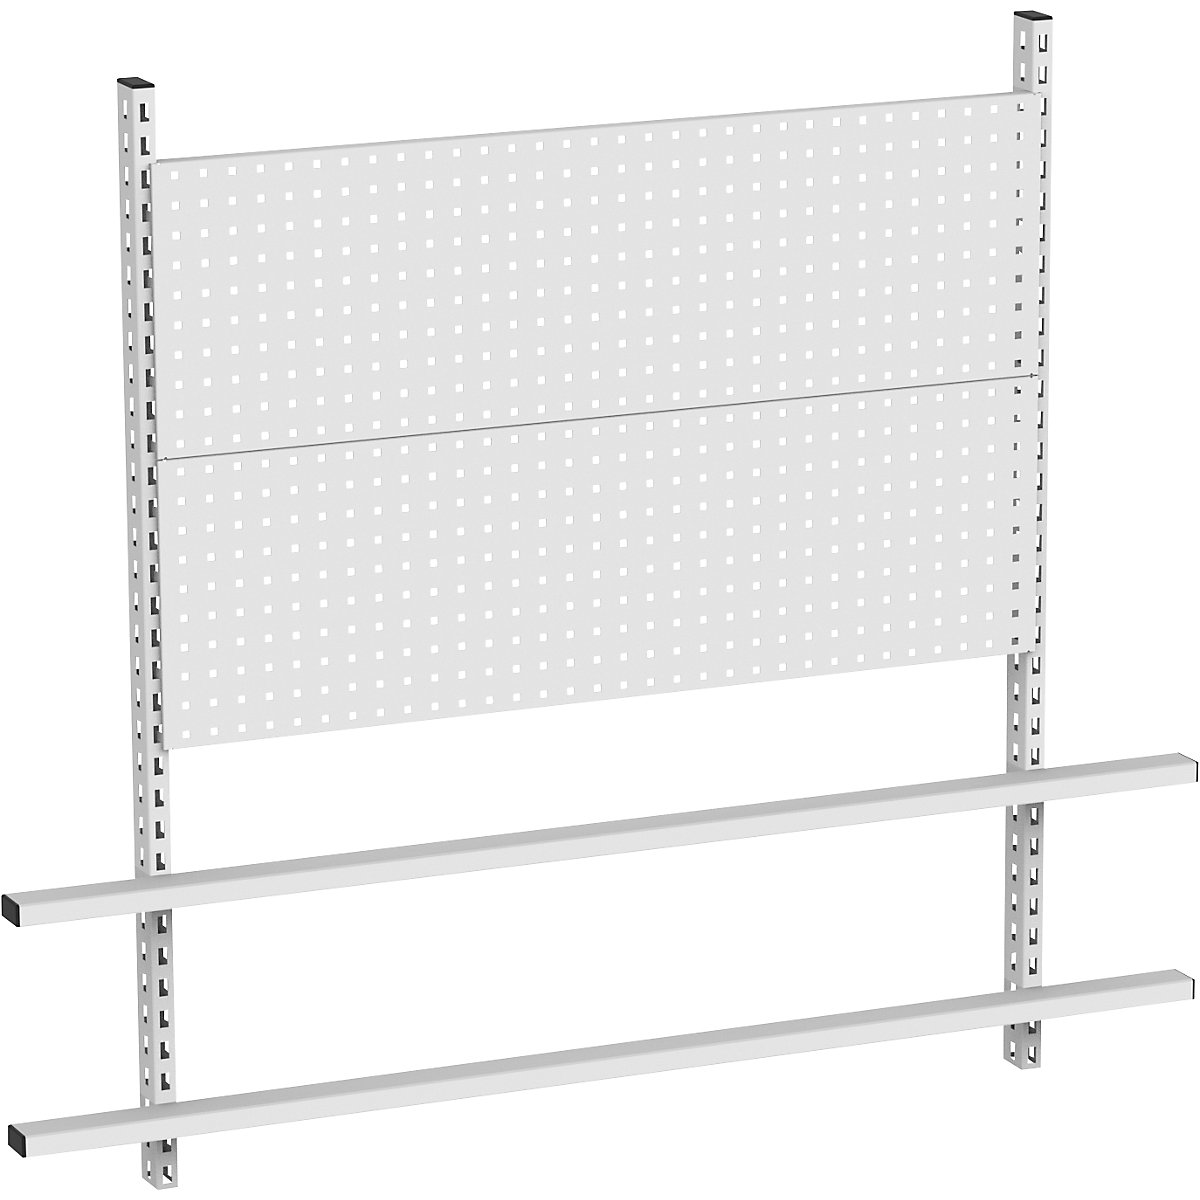 Add-on for table with perforated walls, with 2 supports and 2 perforated rear panels, width 1685 mm-1